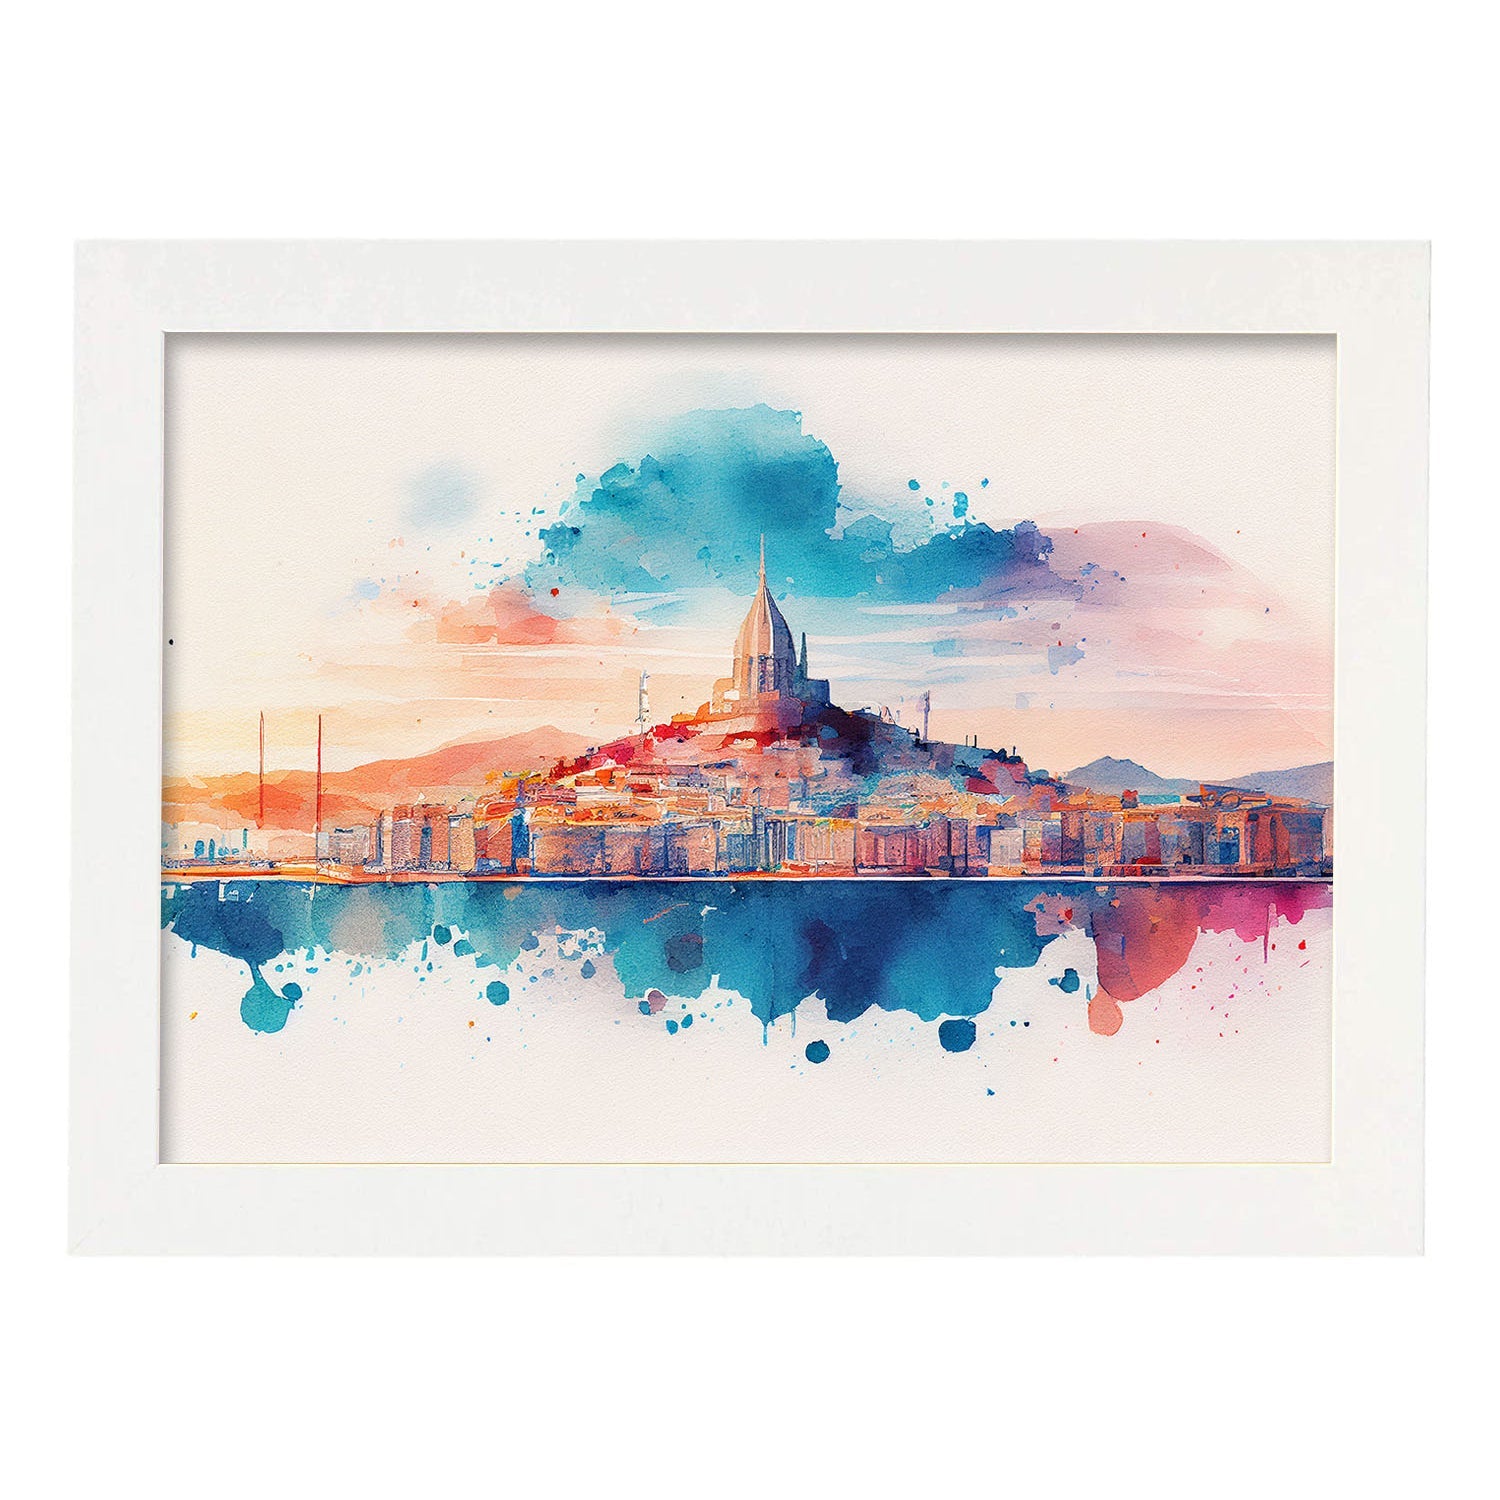 Nacnic watercolor of a skyline of the city of Marseille. Aesthetic Wall Art Prints for Bedroom or Living Room Design.-Artwork-Nacnic-A4-Marco Blanco-Nacnic Estudio SL